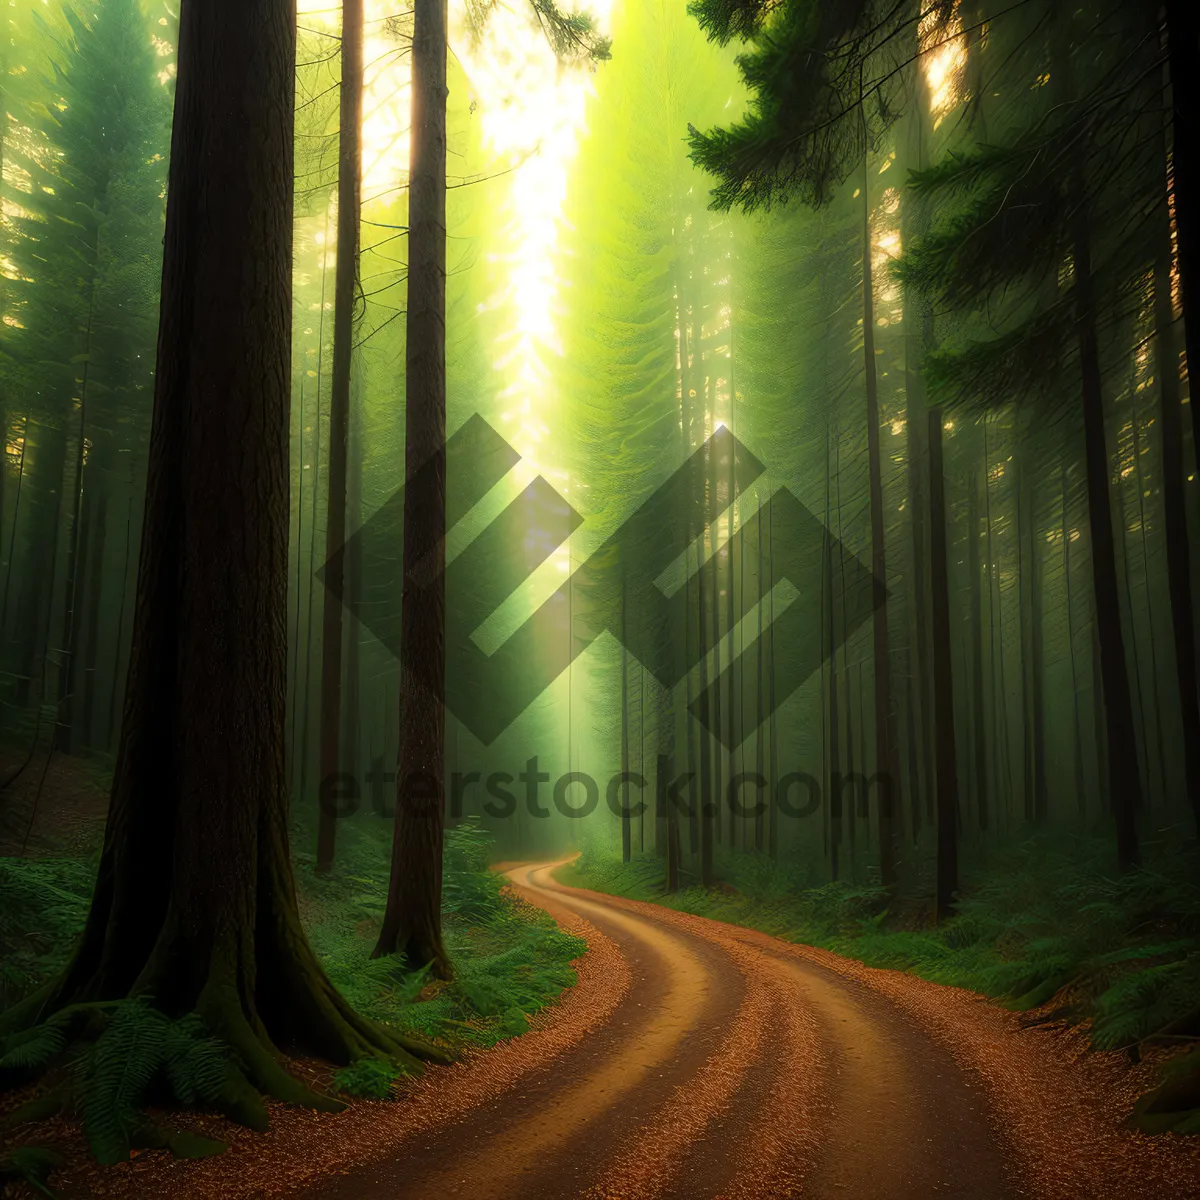 Picture of Misty Morning Serenity: Forest Path through Sunlit Woods